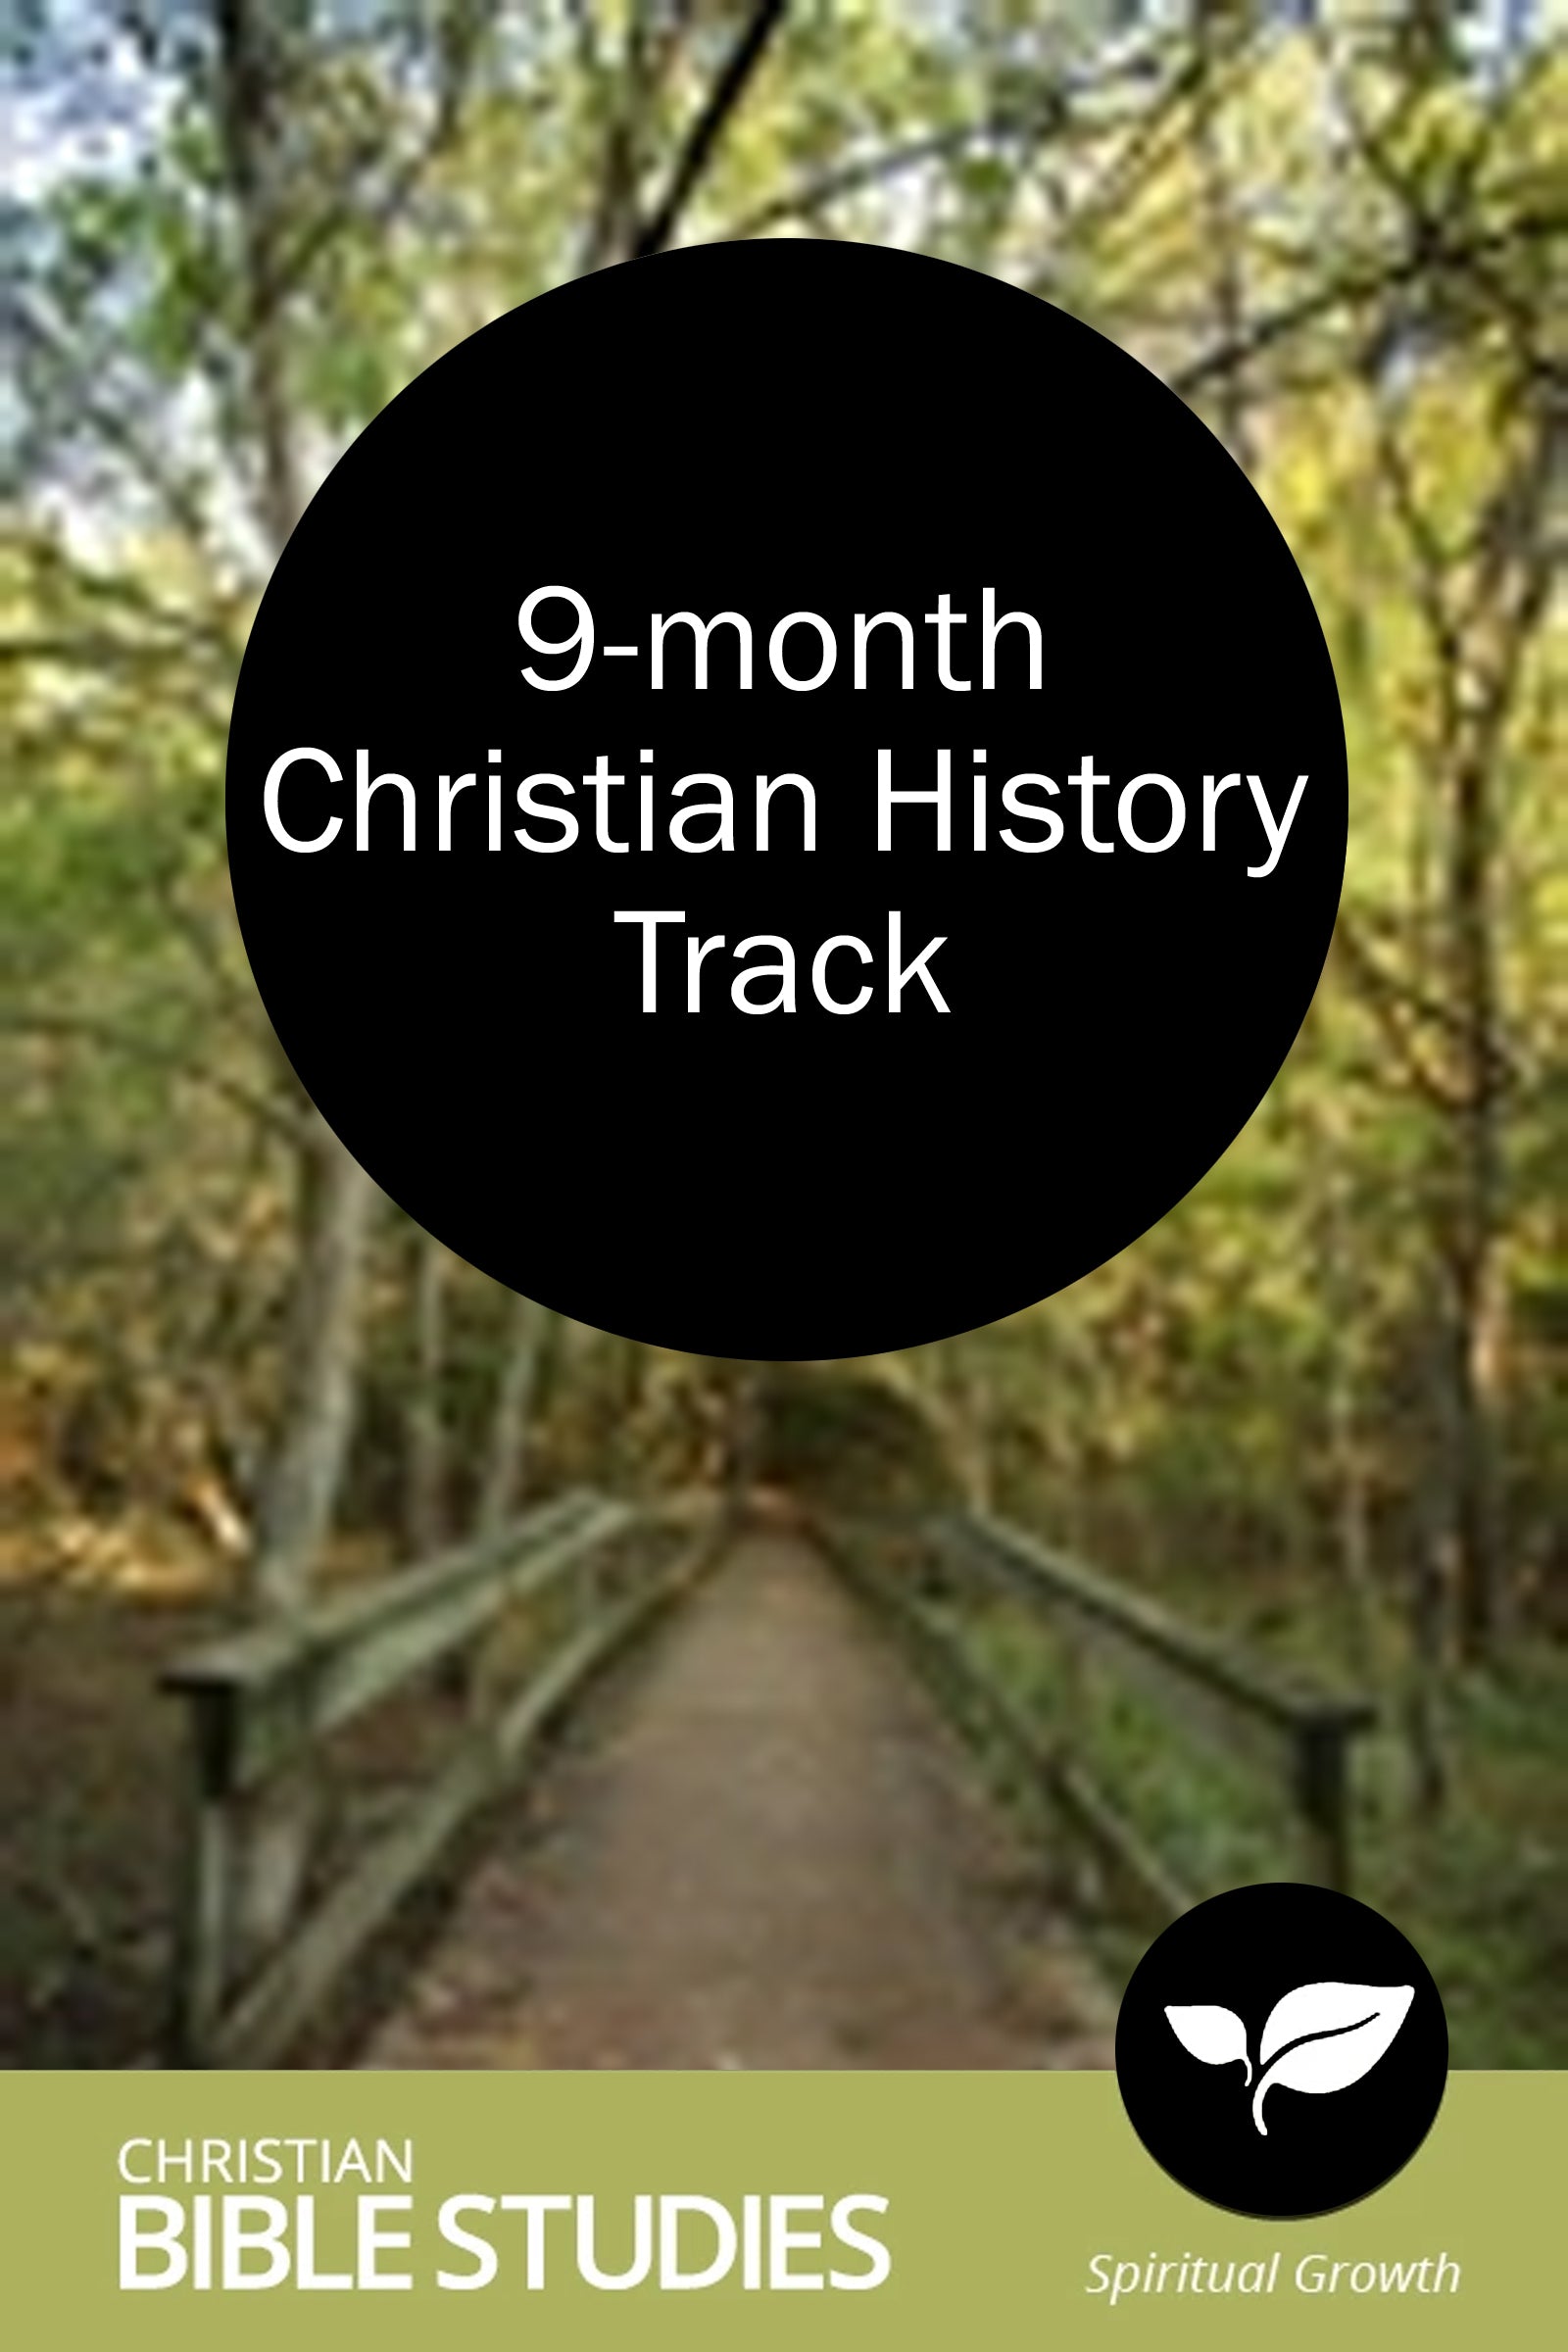 9-month Christian History Track